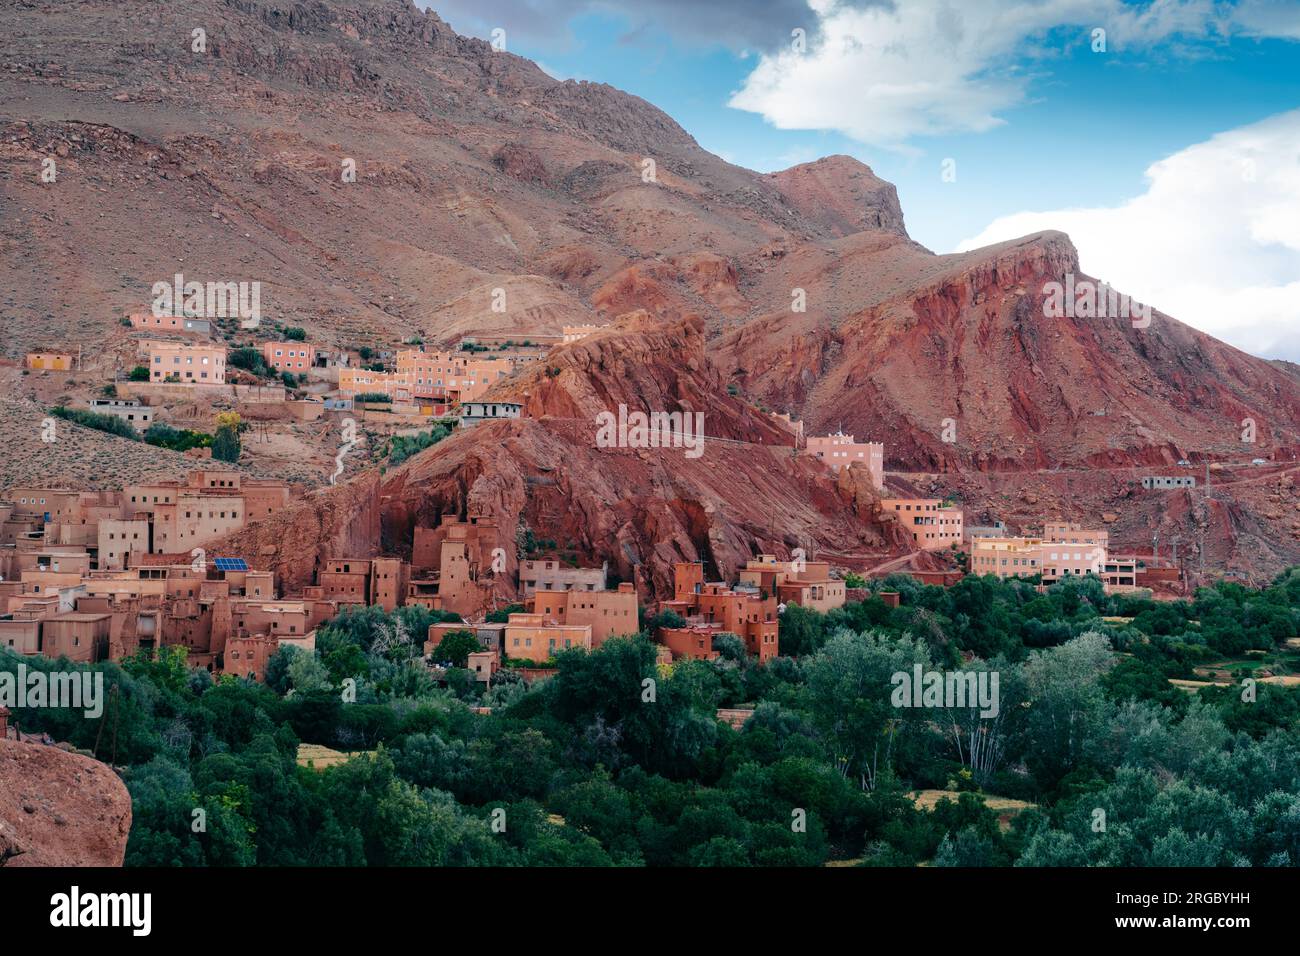 Dades Gorges: Nature masterpiece in Morocco, a stunning canyon with dramatic rock formations and picturesque landscapes, perfect for outdoor Stock Photo